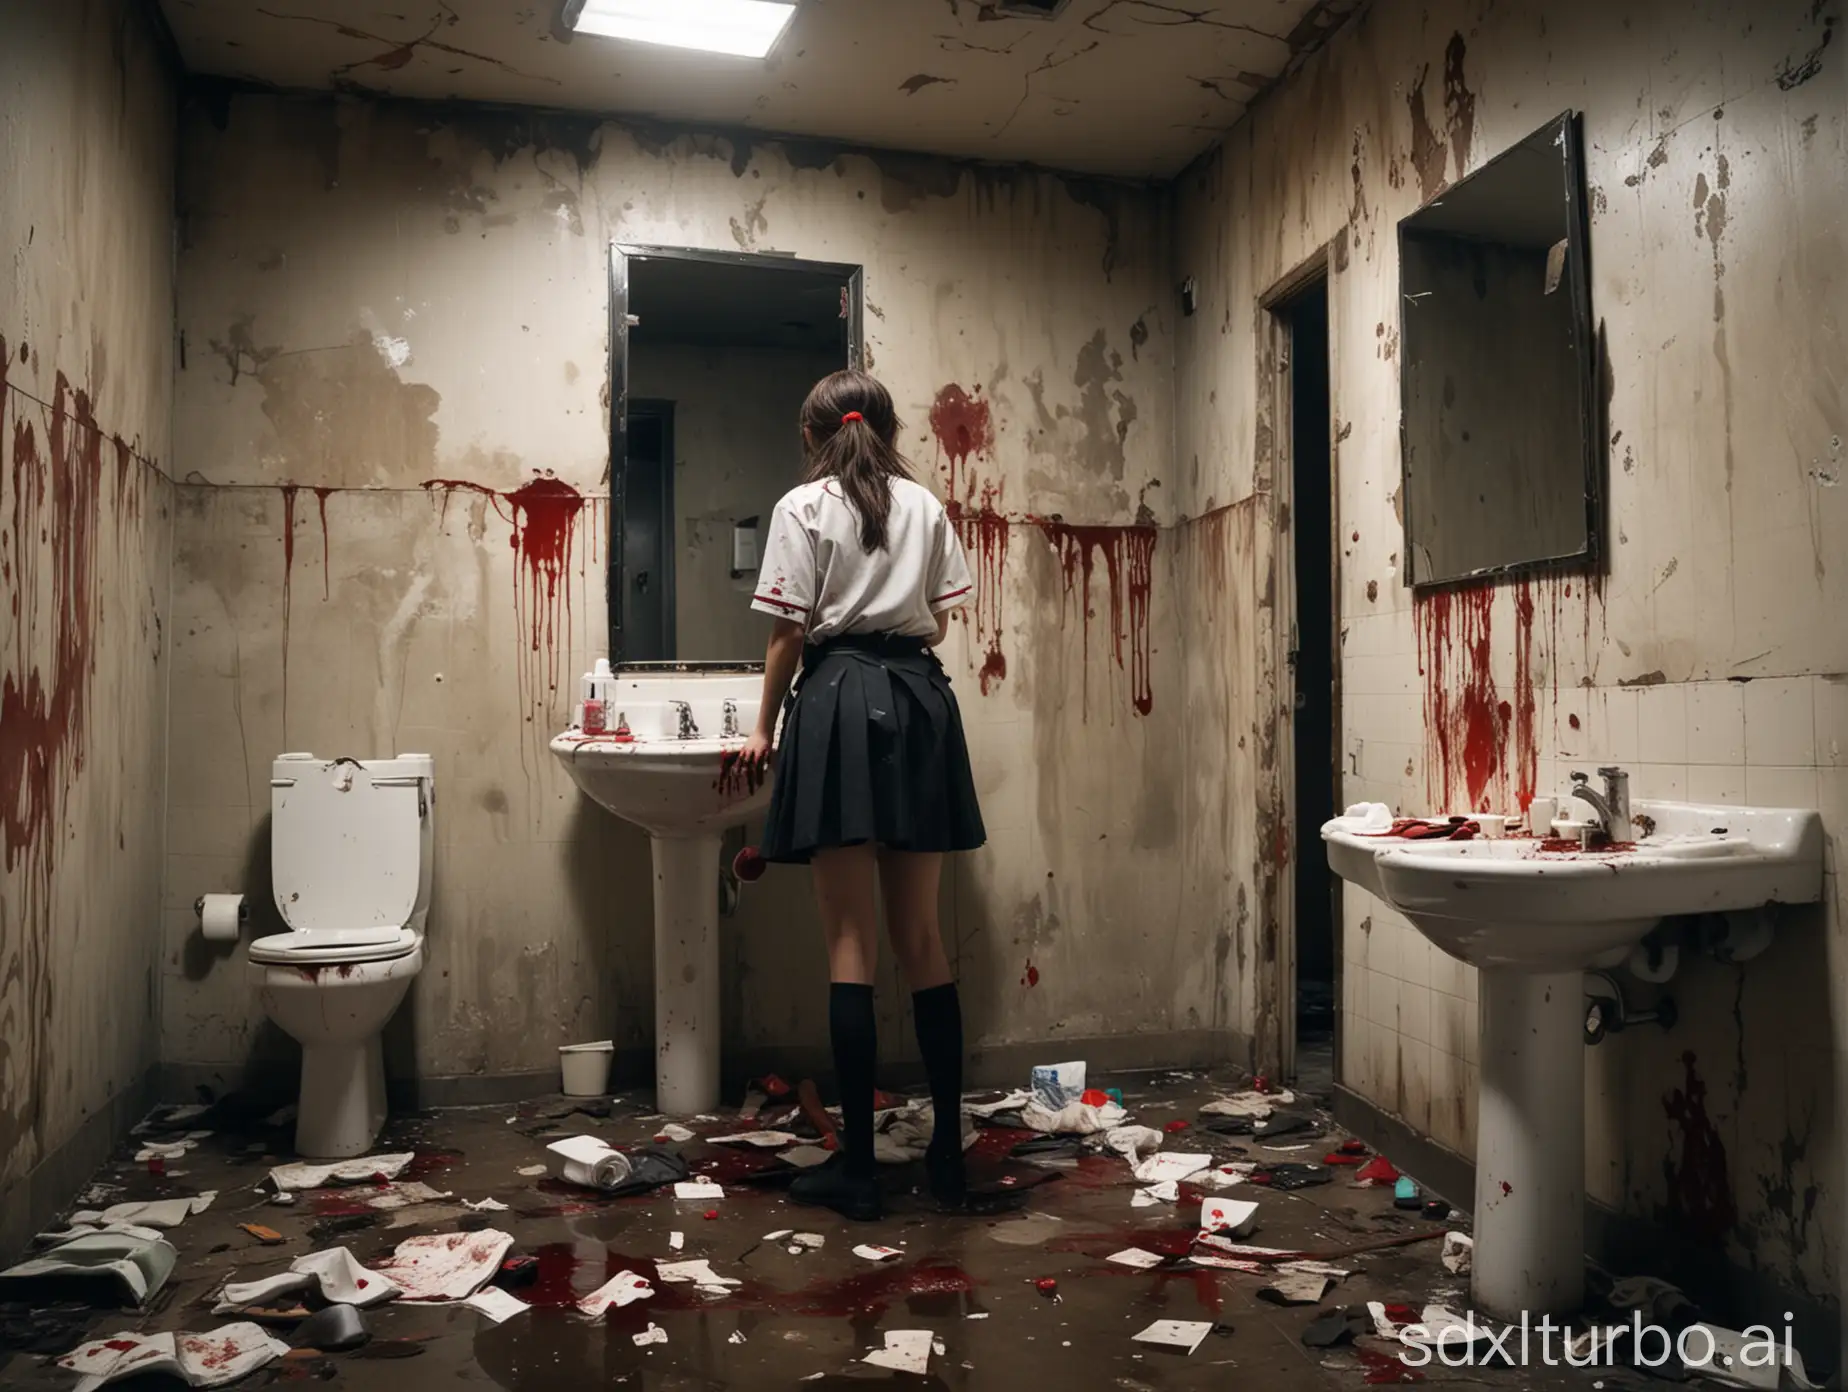 Abandoned-Restroom-Scene-with-Bloodstains-Mirror-and-Female-Student-in-JK-School-Uniform